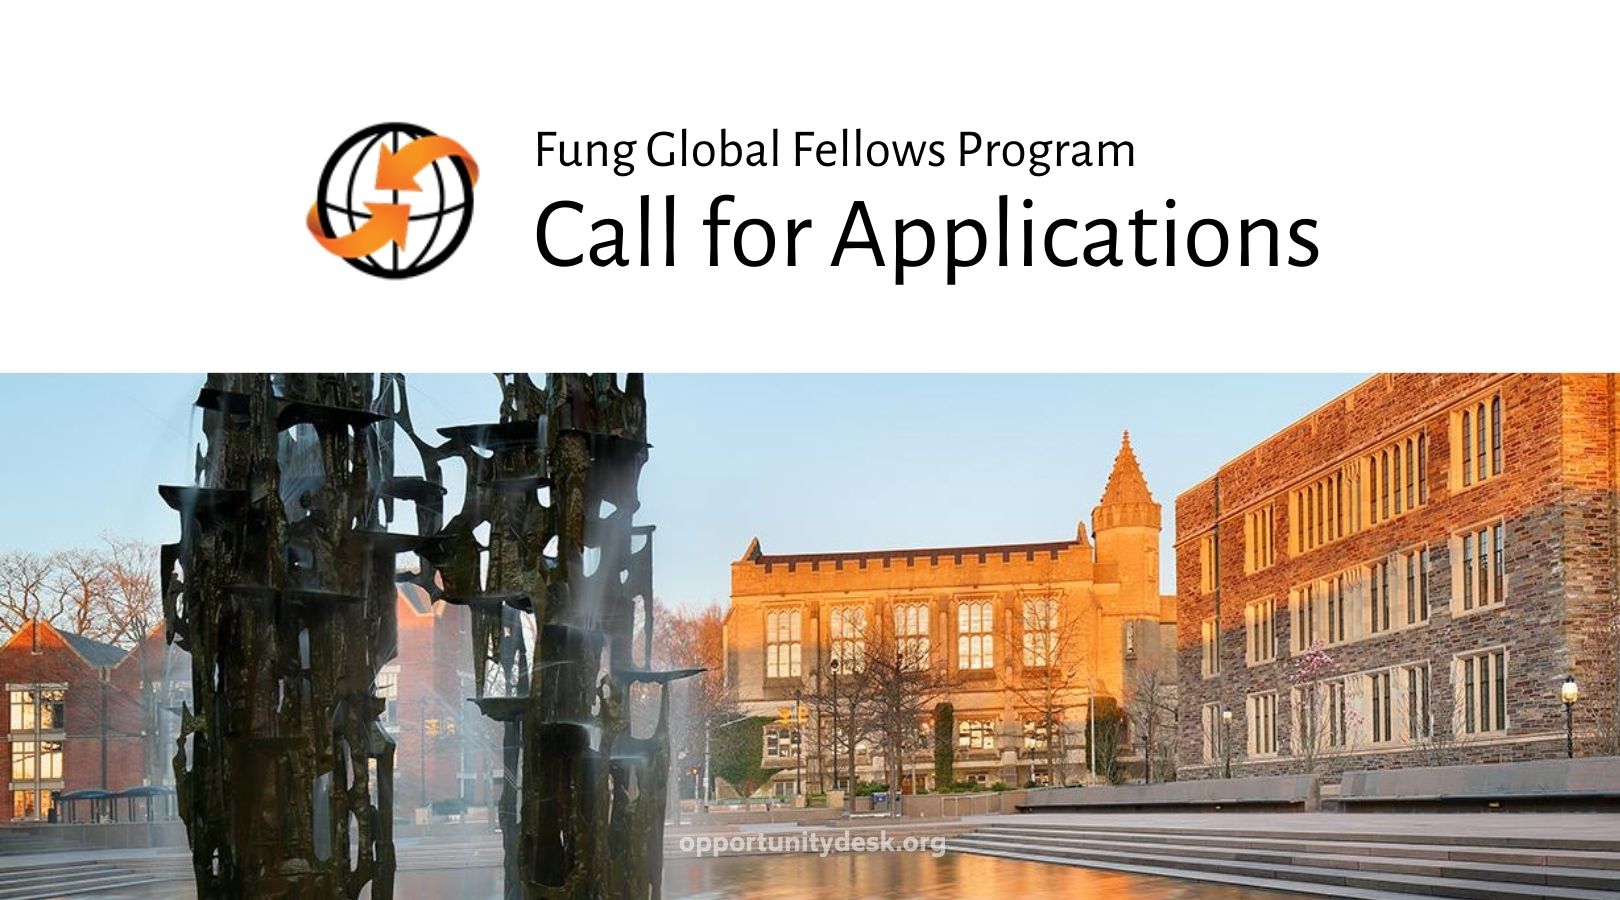 Fung Global Fellows Program at the Princeton Institute for International and Regional Studies (PIIRS) 2022-2023